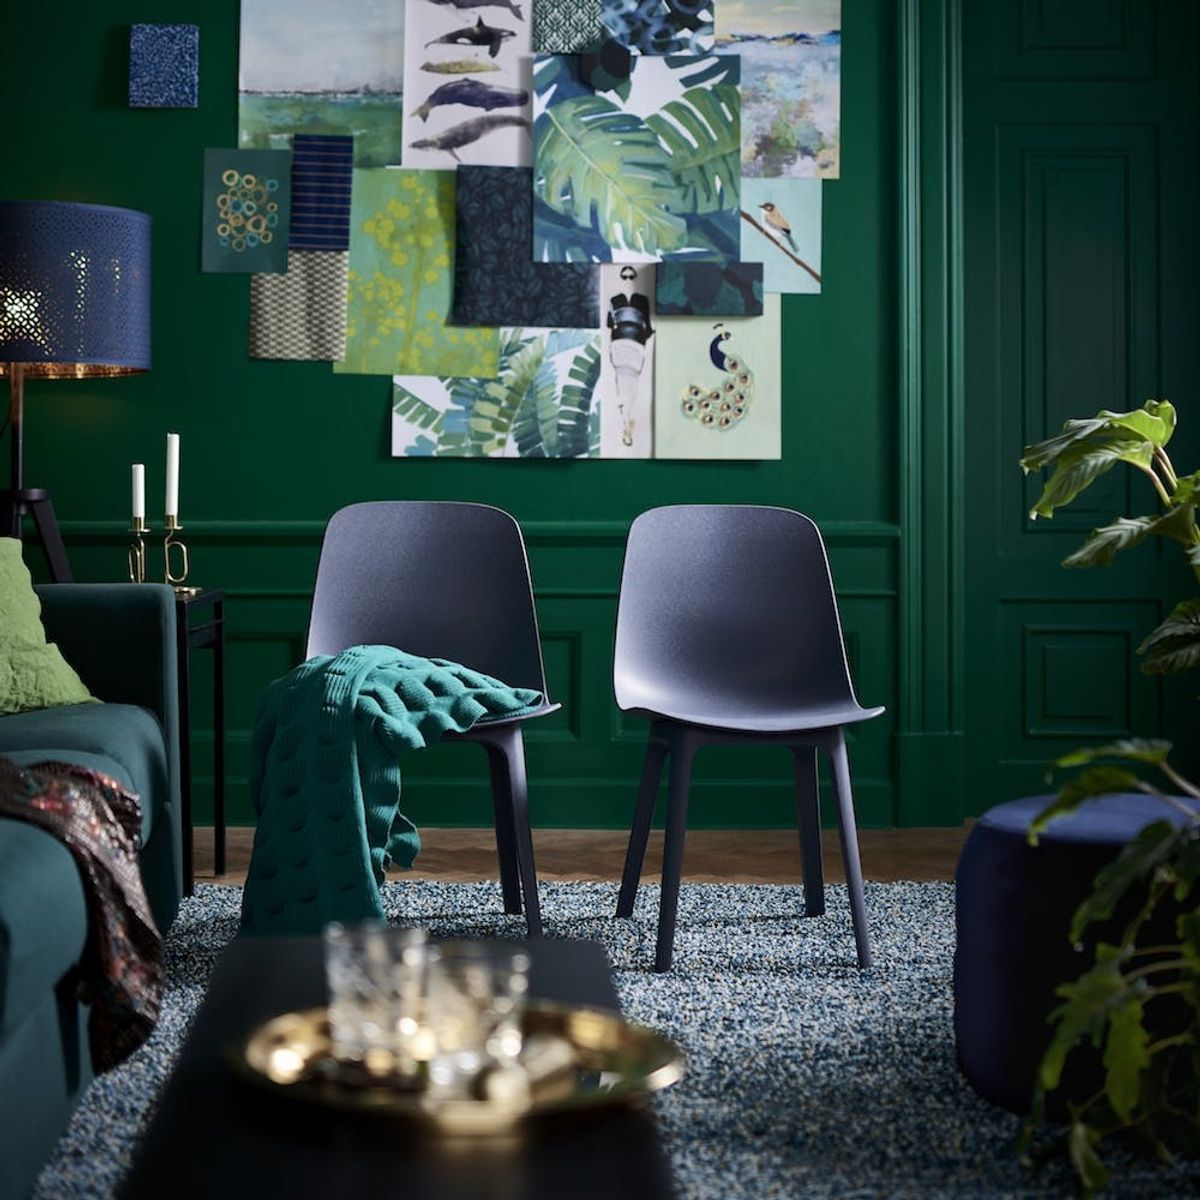 Sneak Peek! IKEA’s 2018 Catalog Is All About Those Moody Colors